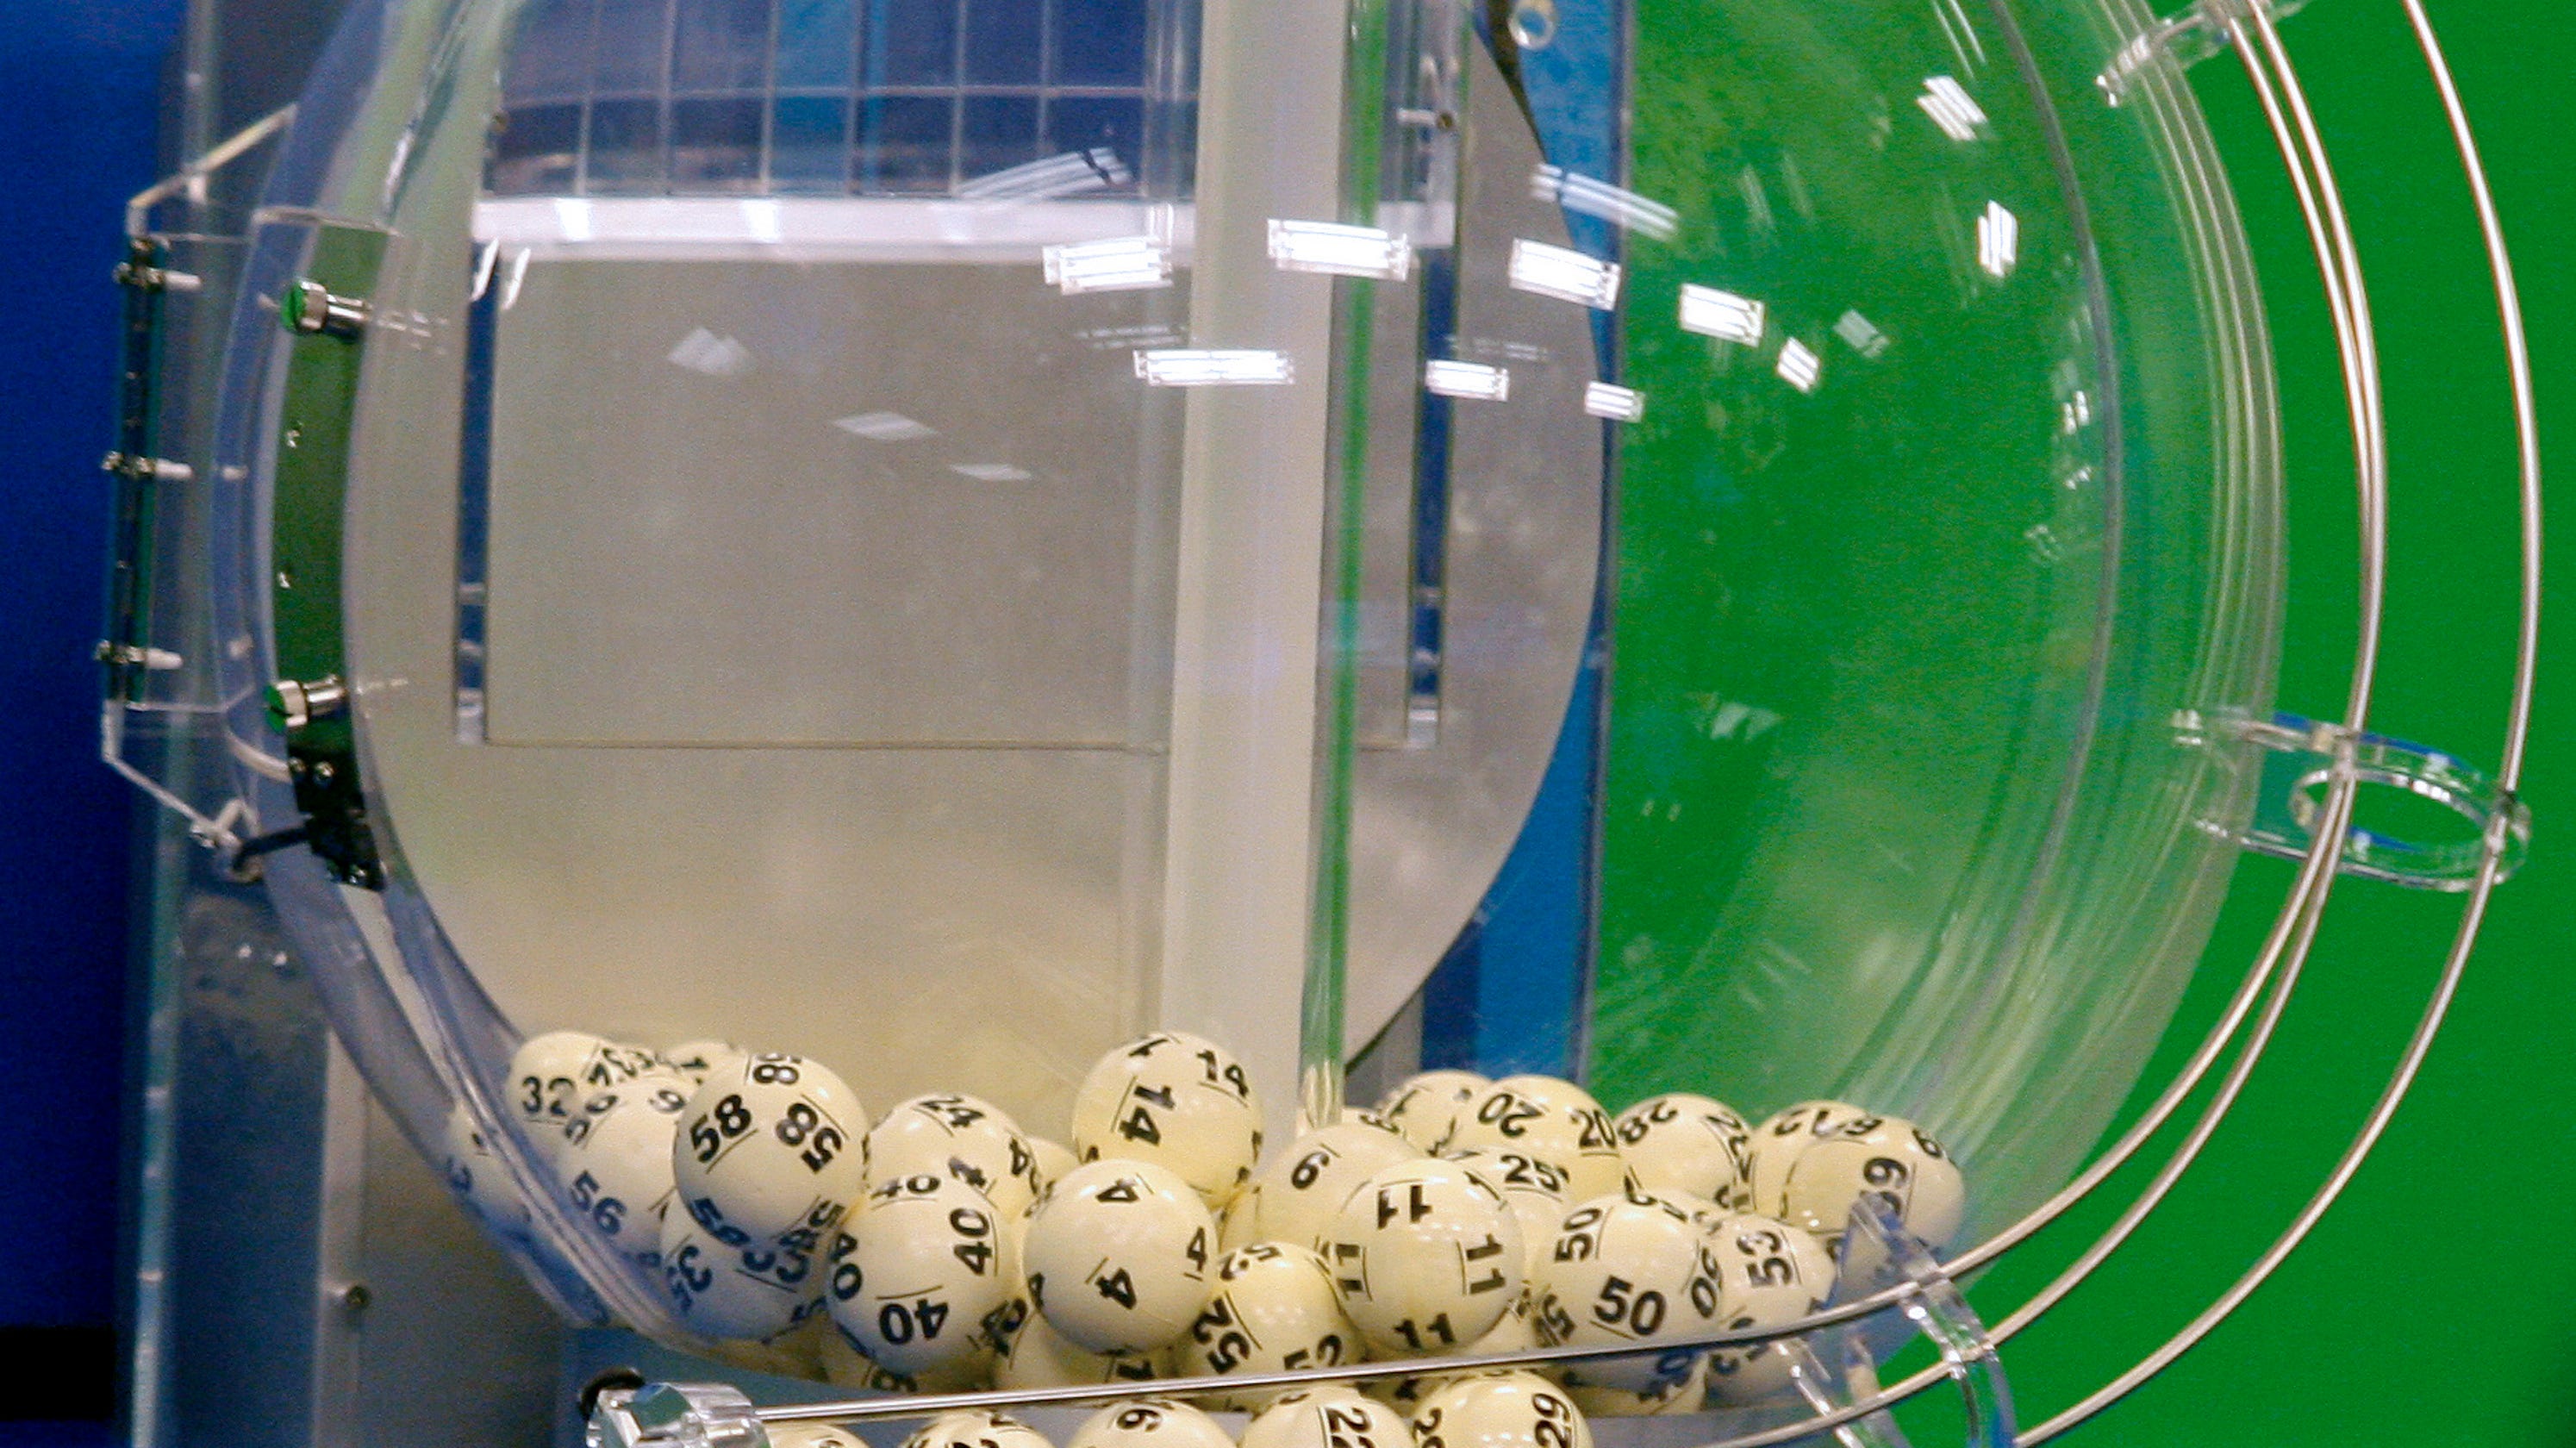 SC store sells $2M Powerball lottery ticket as jackpot grows2989 x 1680